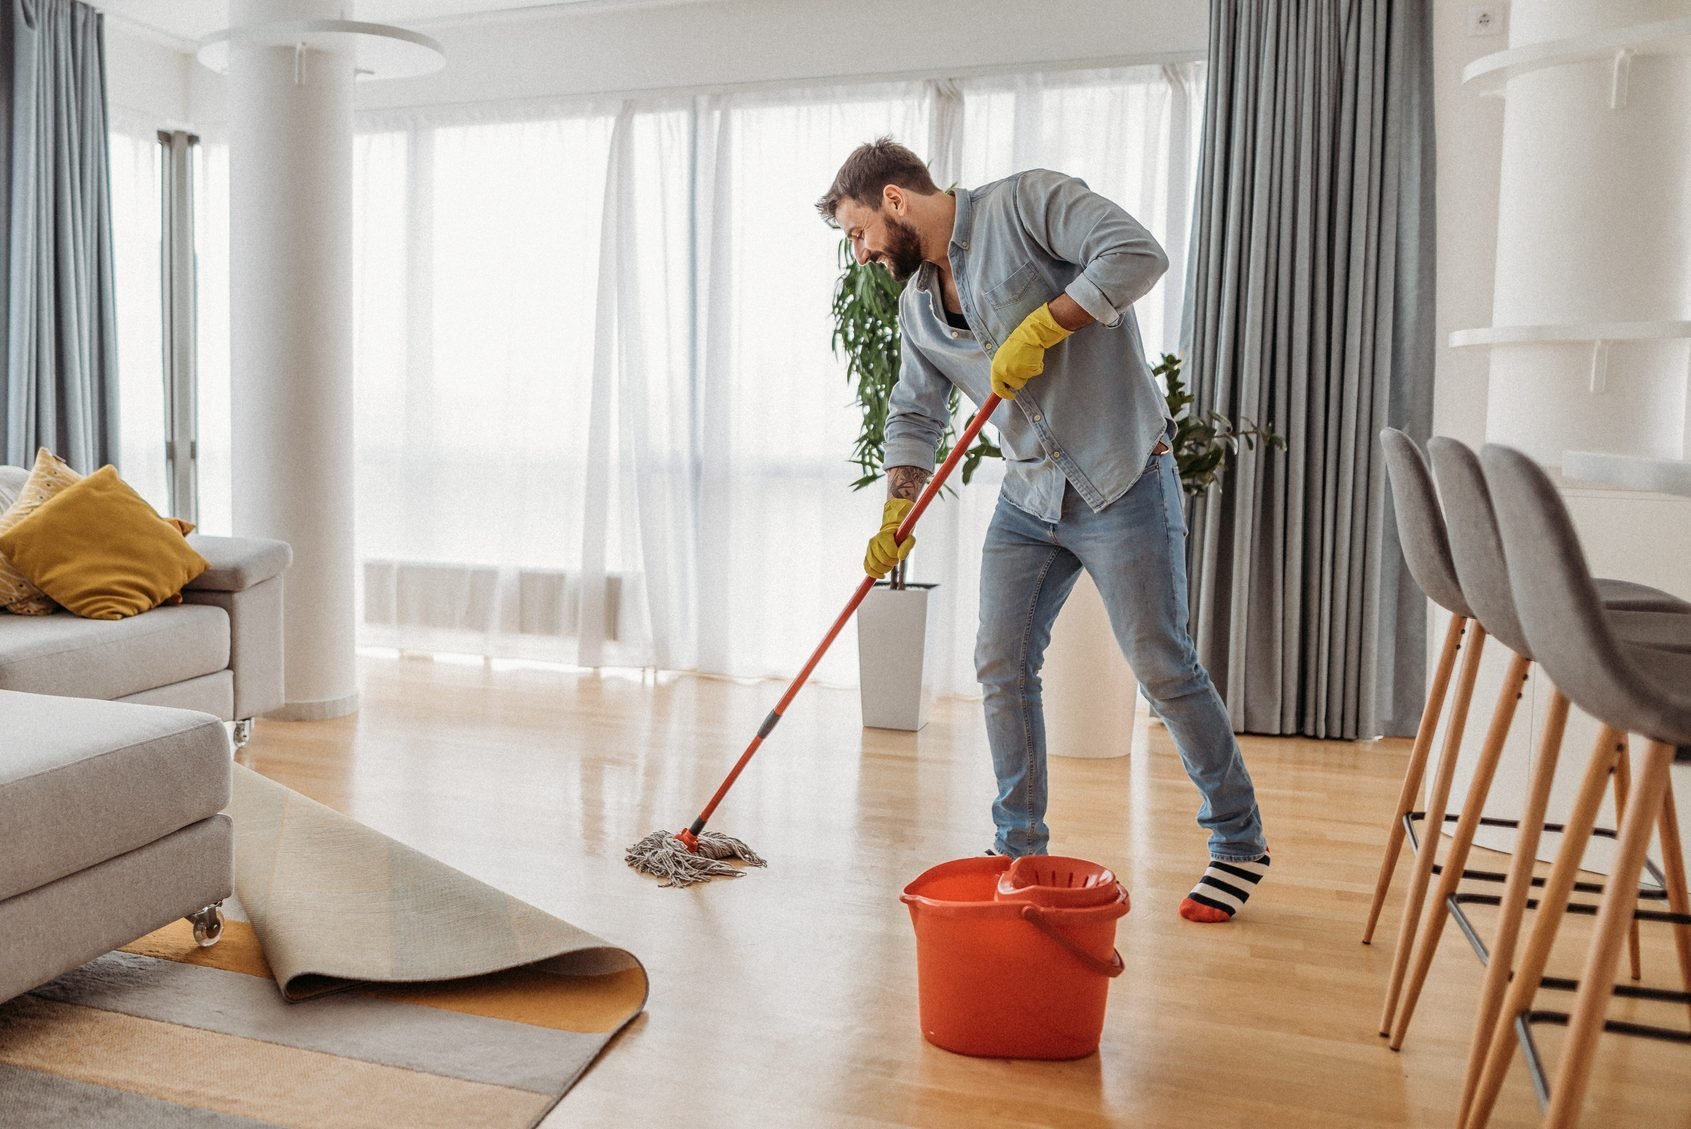 Crazy Clean, House Cleaning Services